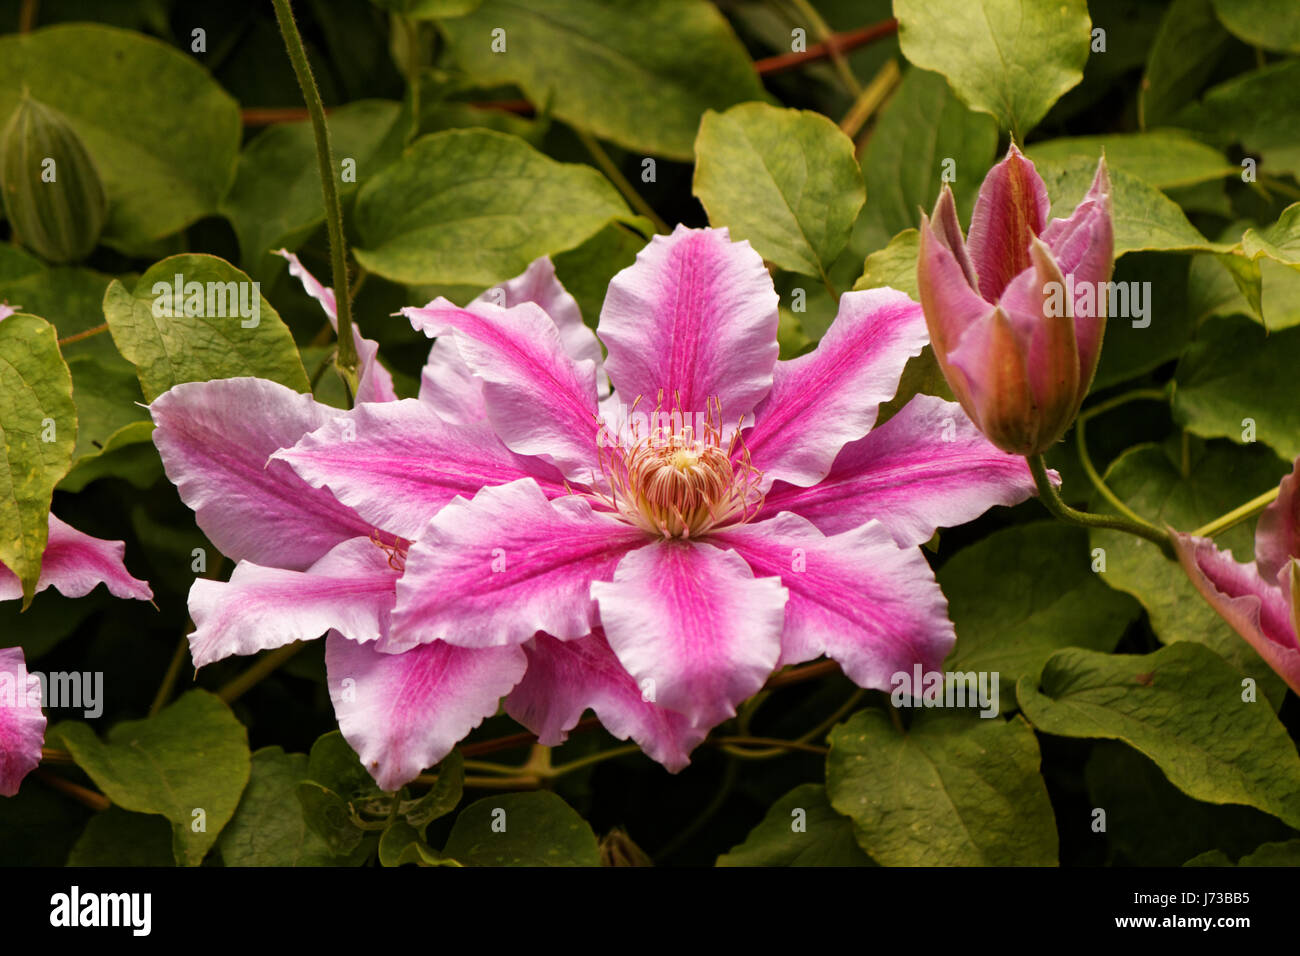 Clematis 'Dr Ruppel' climbing plant Stock Photo